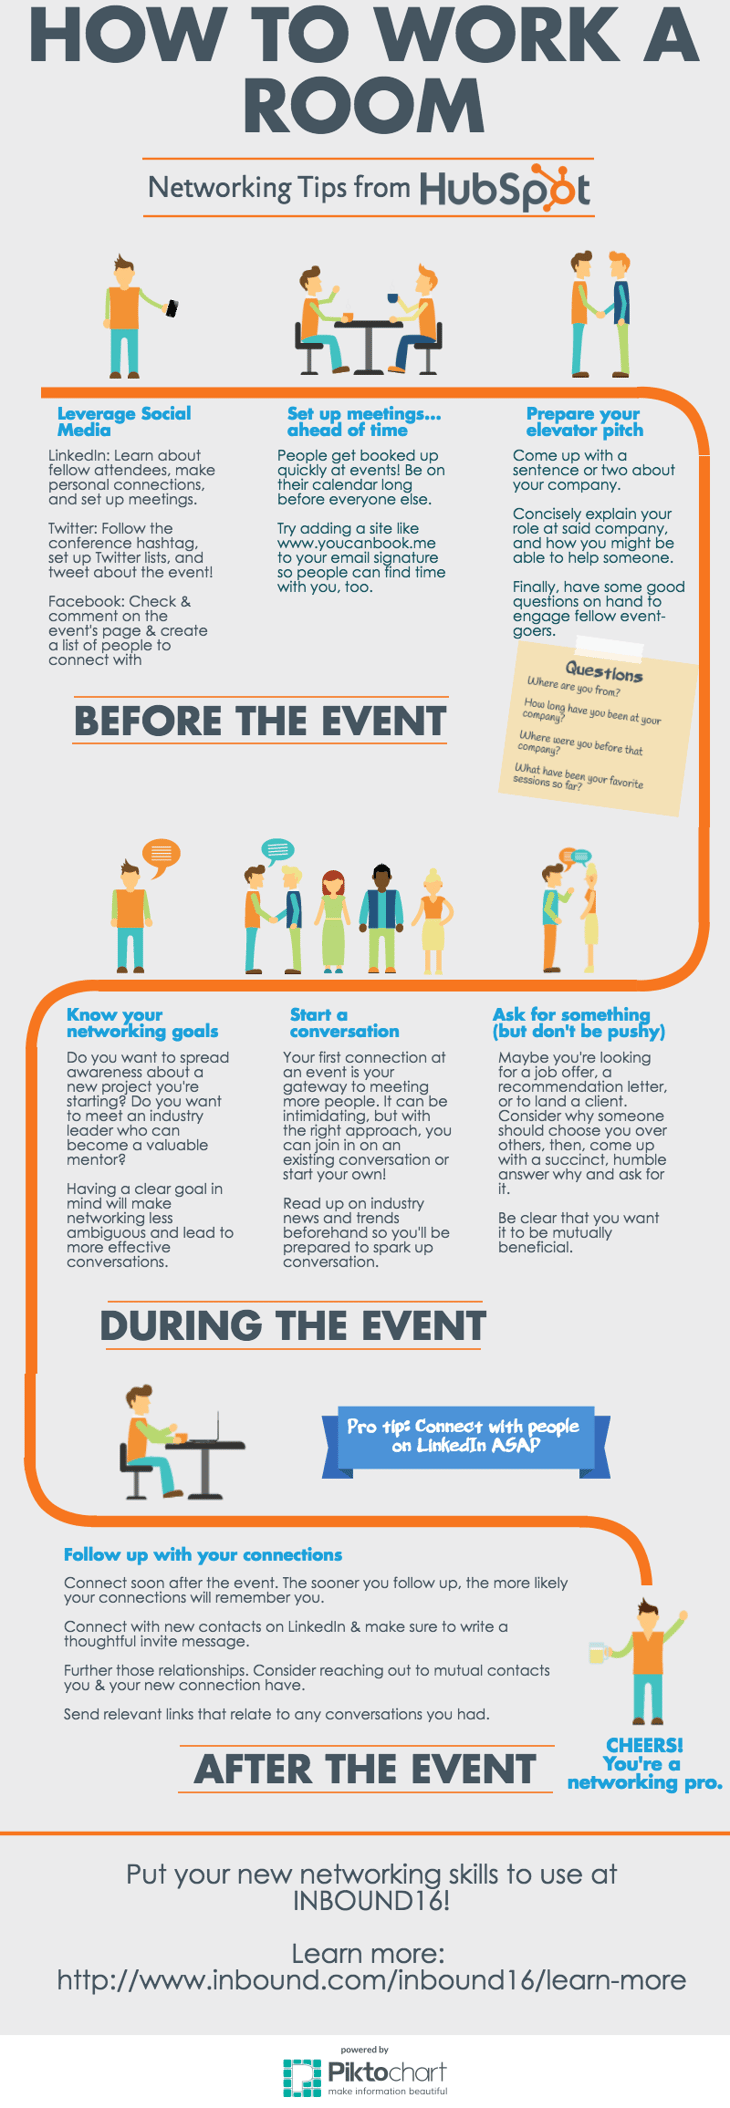 How-to-work-a-room-infographic-inbound16.png